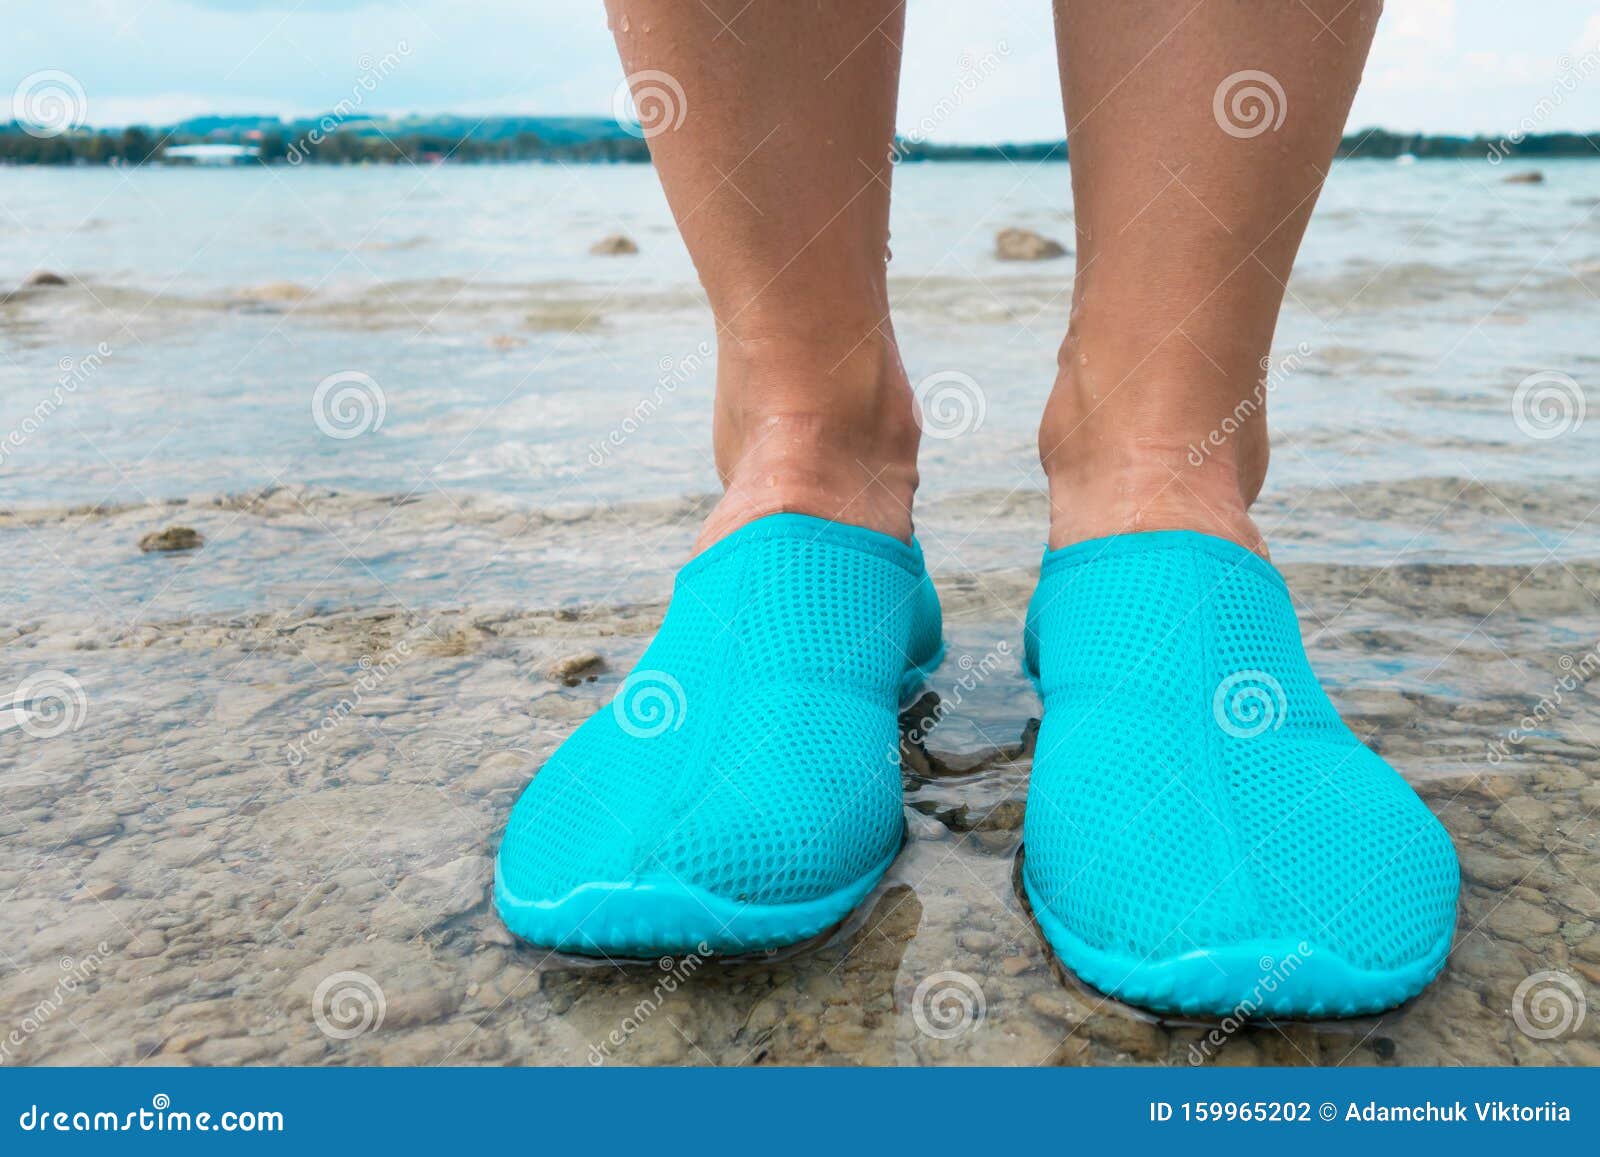 Water Shoes / Blue Swimming Shoes On 